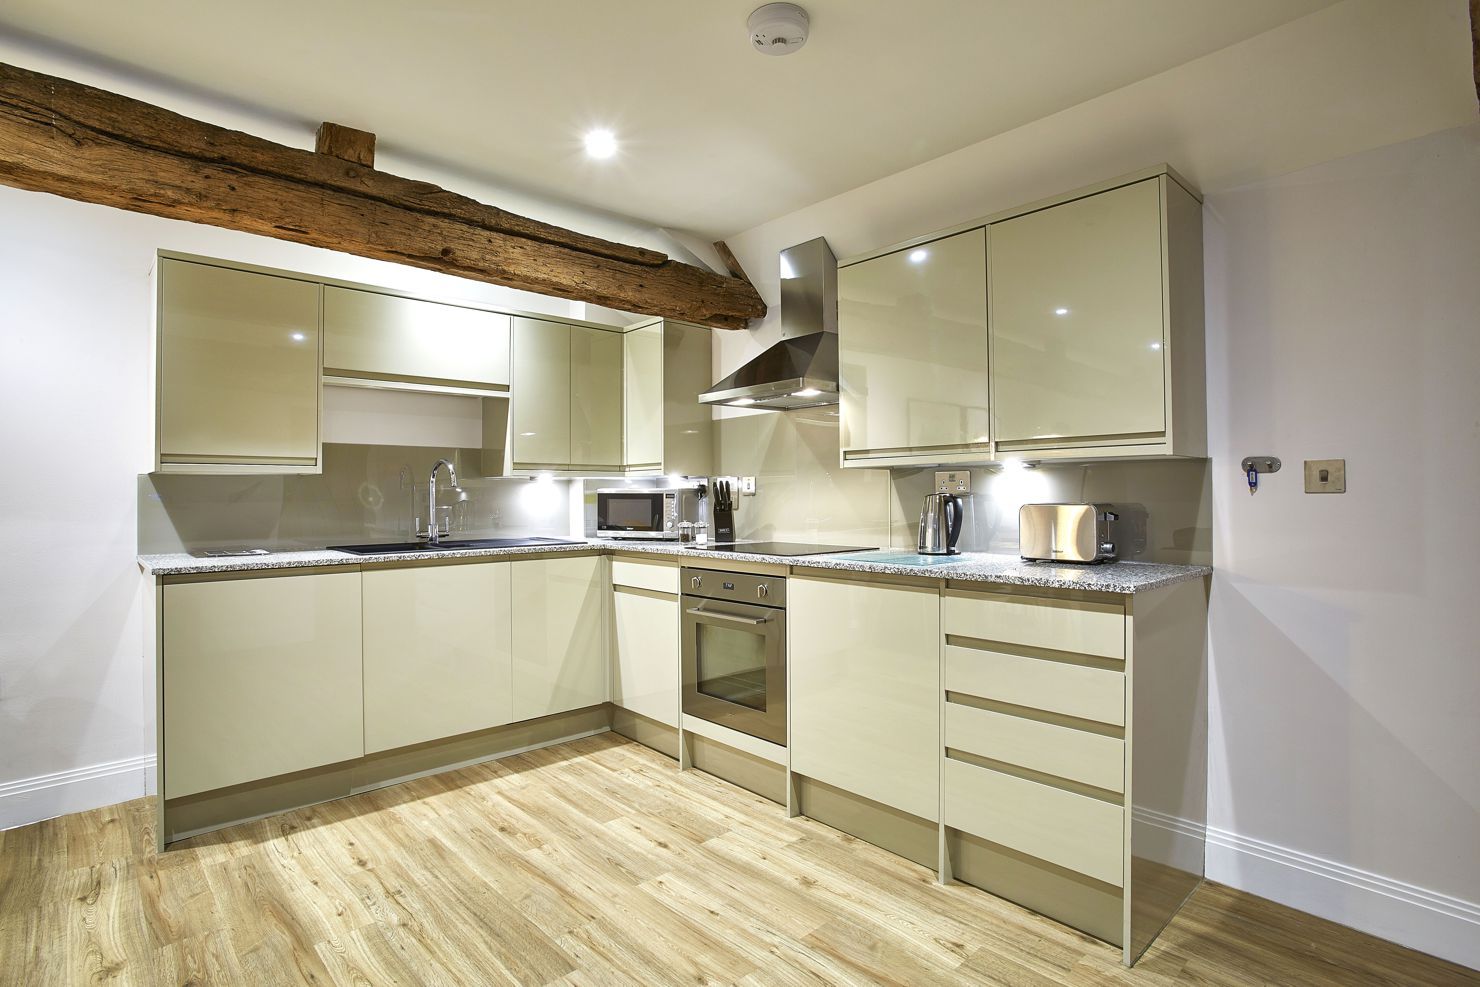 Amazing-Self-Catering-Accommodation-Newbury!-Centrally-located-Serviced-Apartments-Newbury-and-corporate-accommodation-UK.-Competitive-Rates-·-No-Booking-Fees-·-Free-Wi-Fi-·-Fully-Furnished-·-Fully-equipped-kitchen-·-Weekly-cleaning-included.-Call-Urban-Stay-now:-+44-(0)-208-691-3920